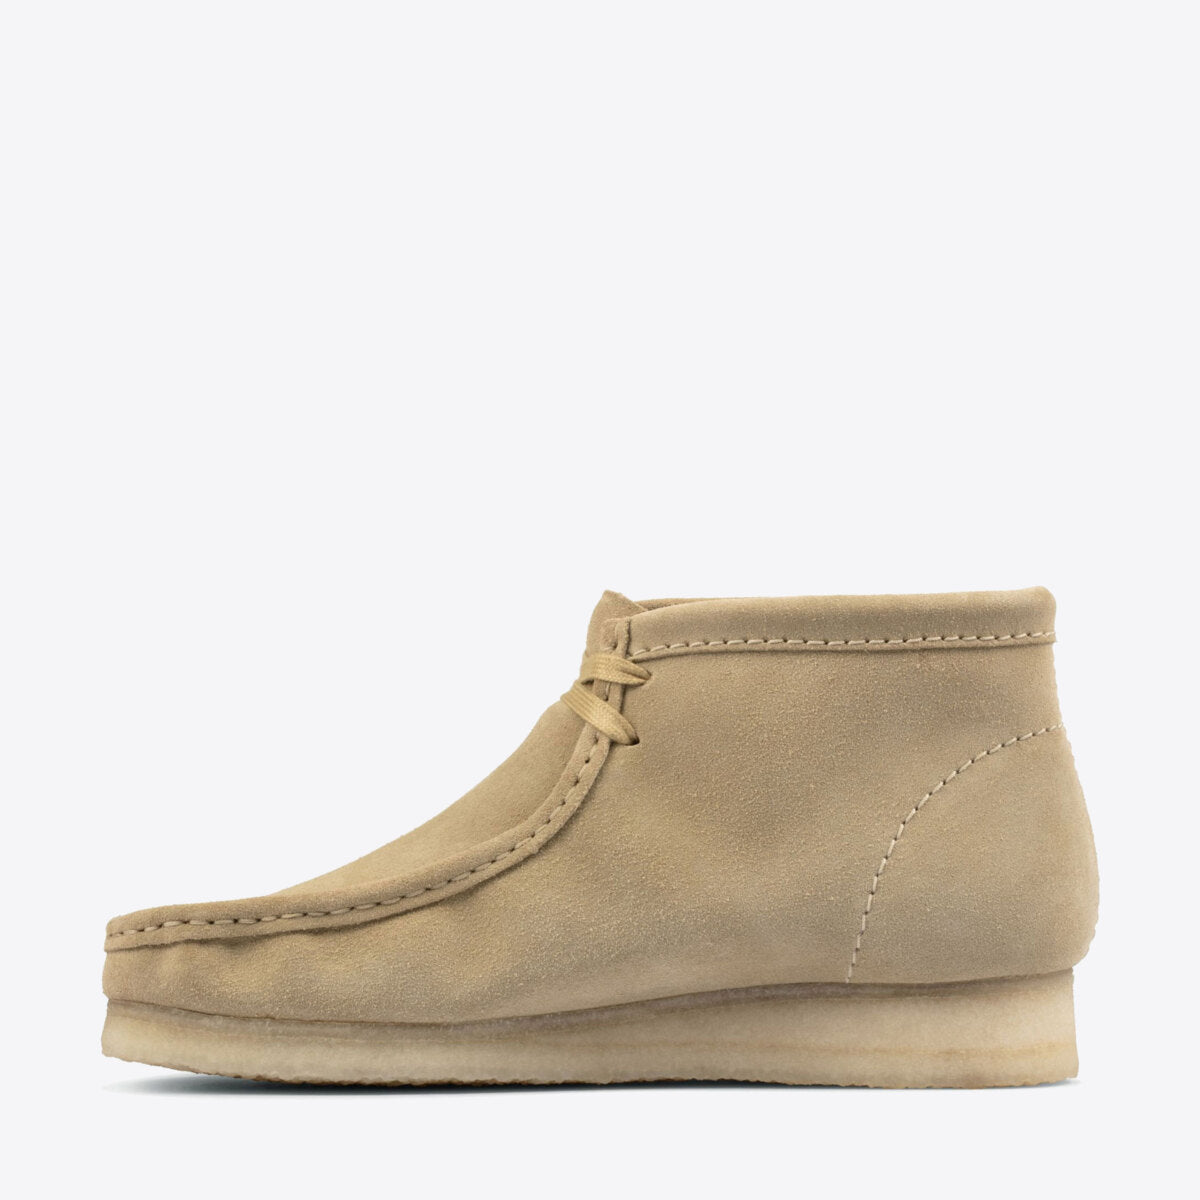 CLARKS Wallabee Boot Suede Maple - Image 5